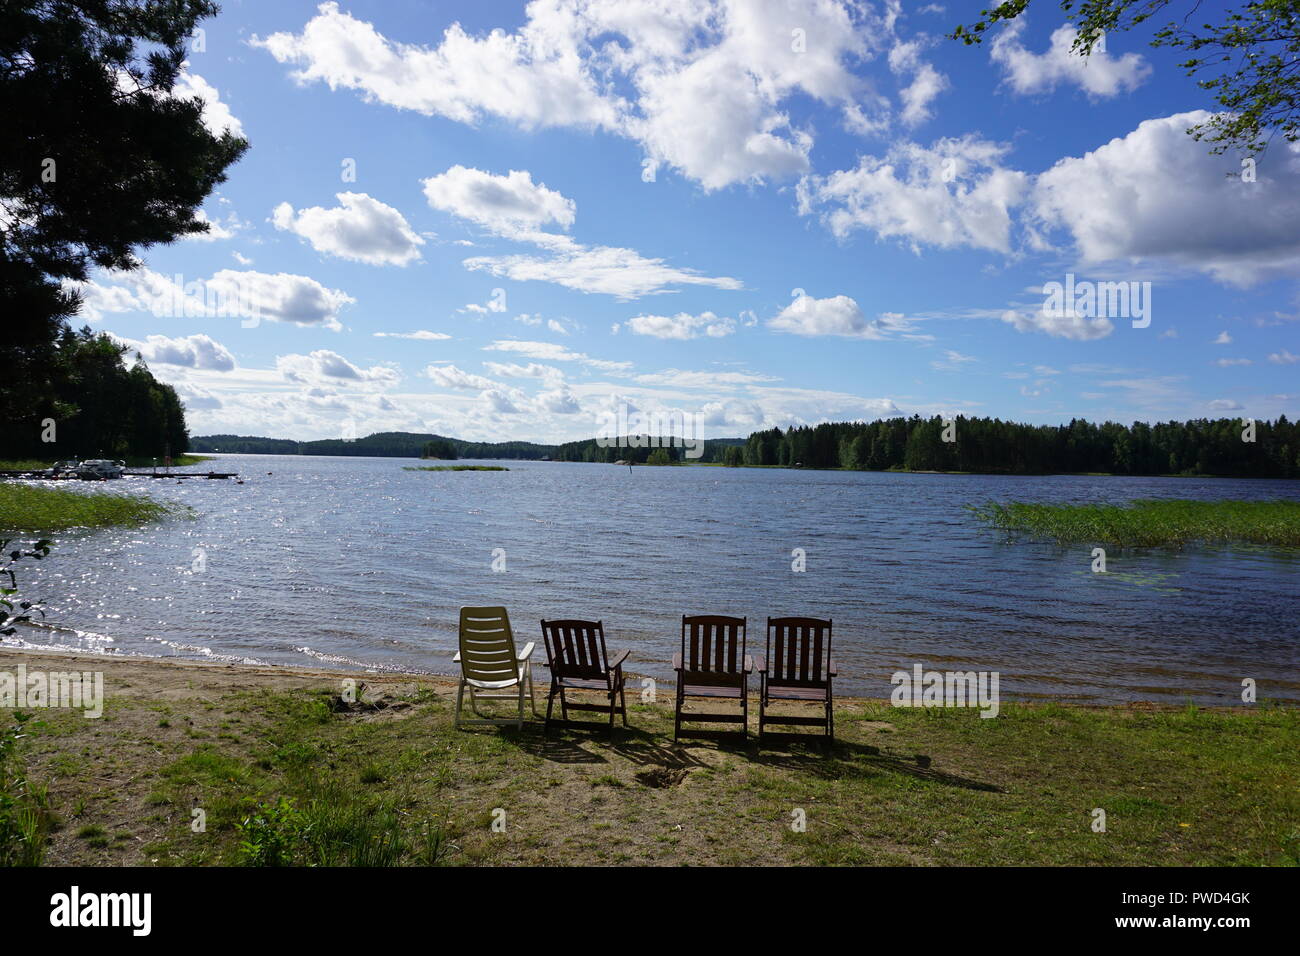 Pure nature in Finland - wild life photography Stock Photo